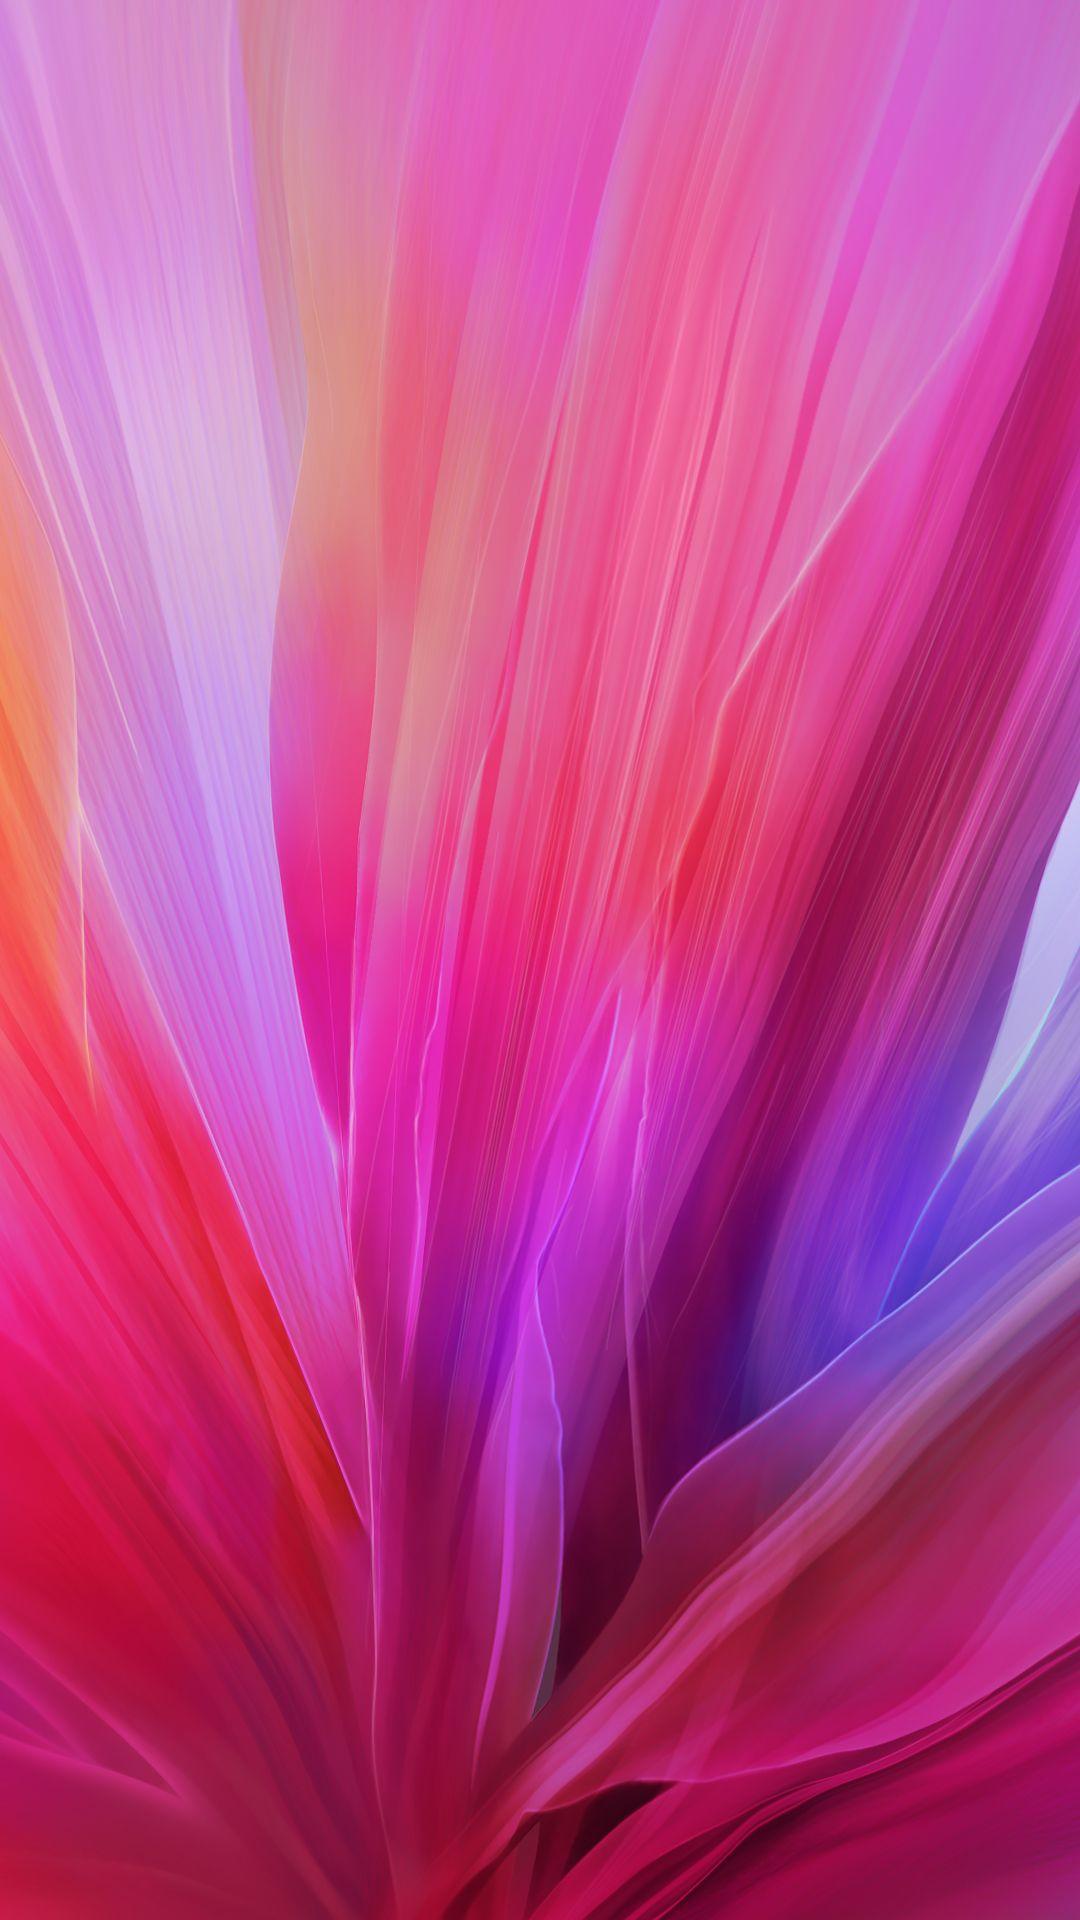 Sony Xperia Z5 Wallpaper with Abstract Colorful Background